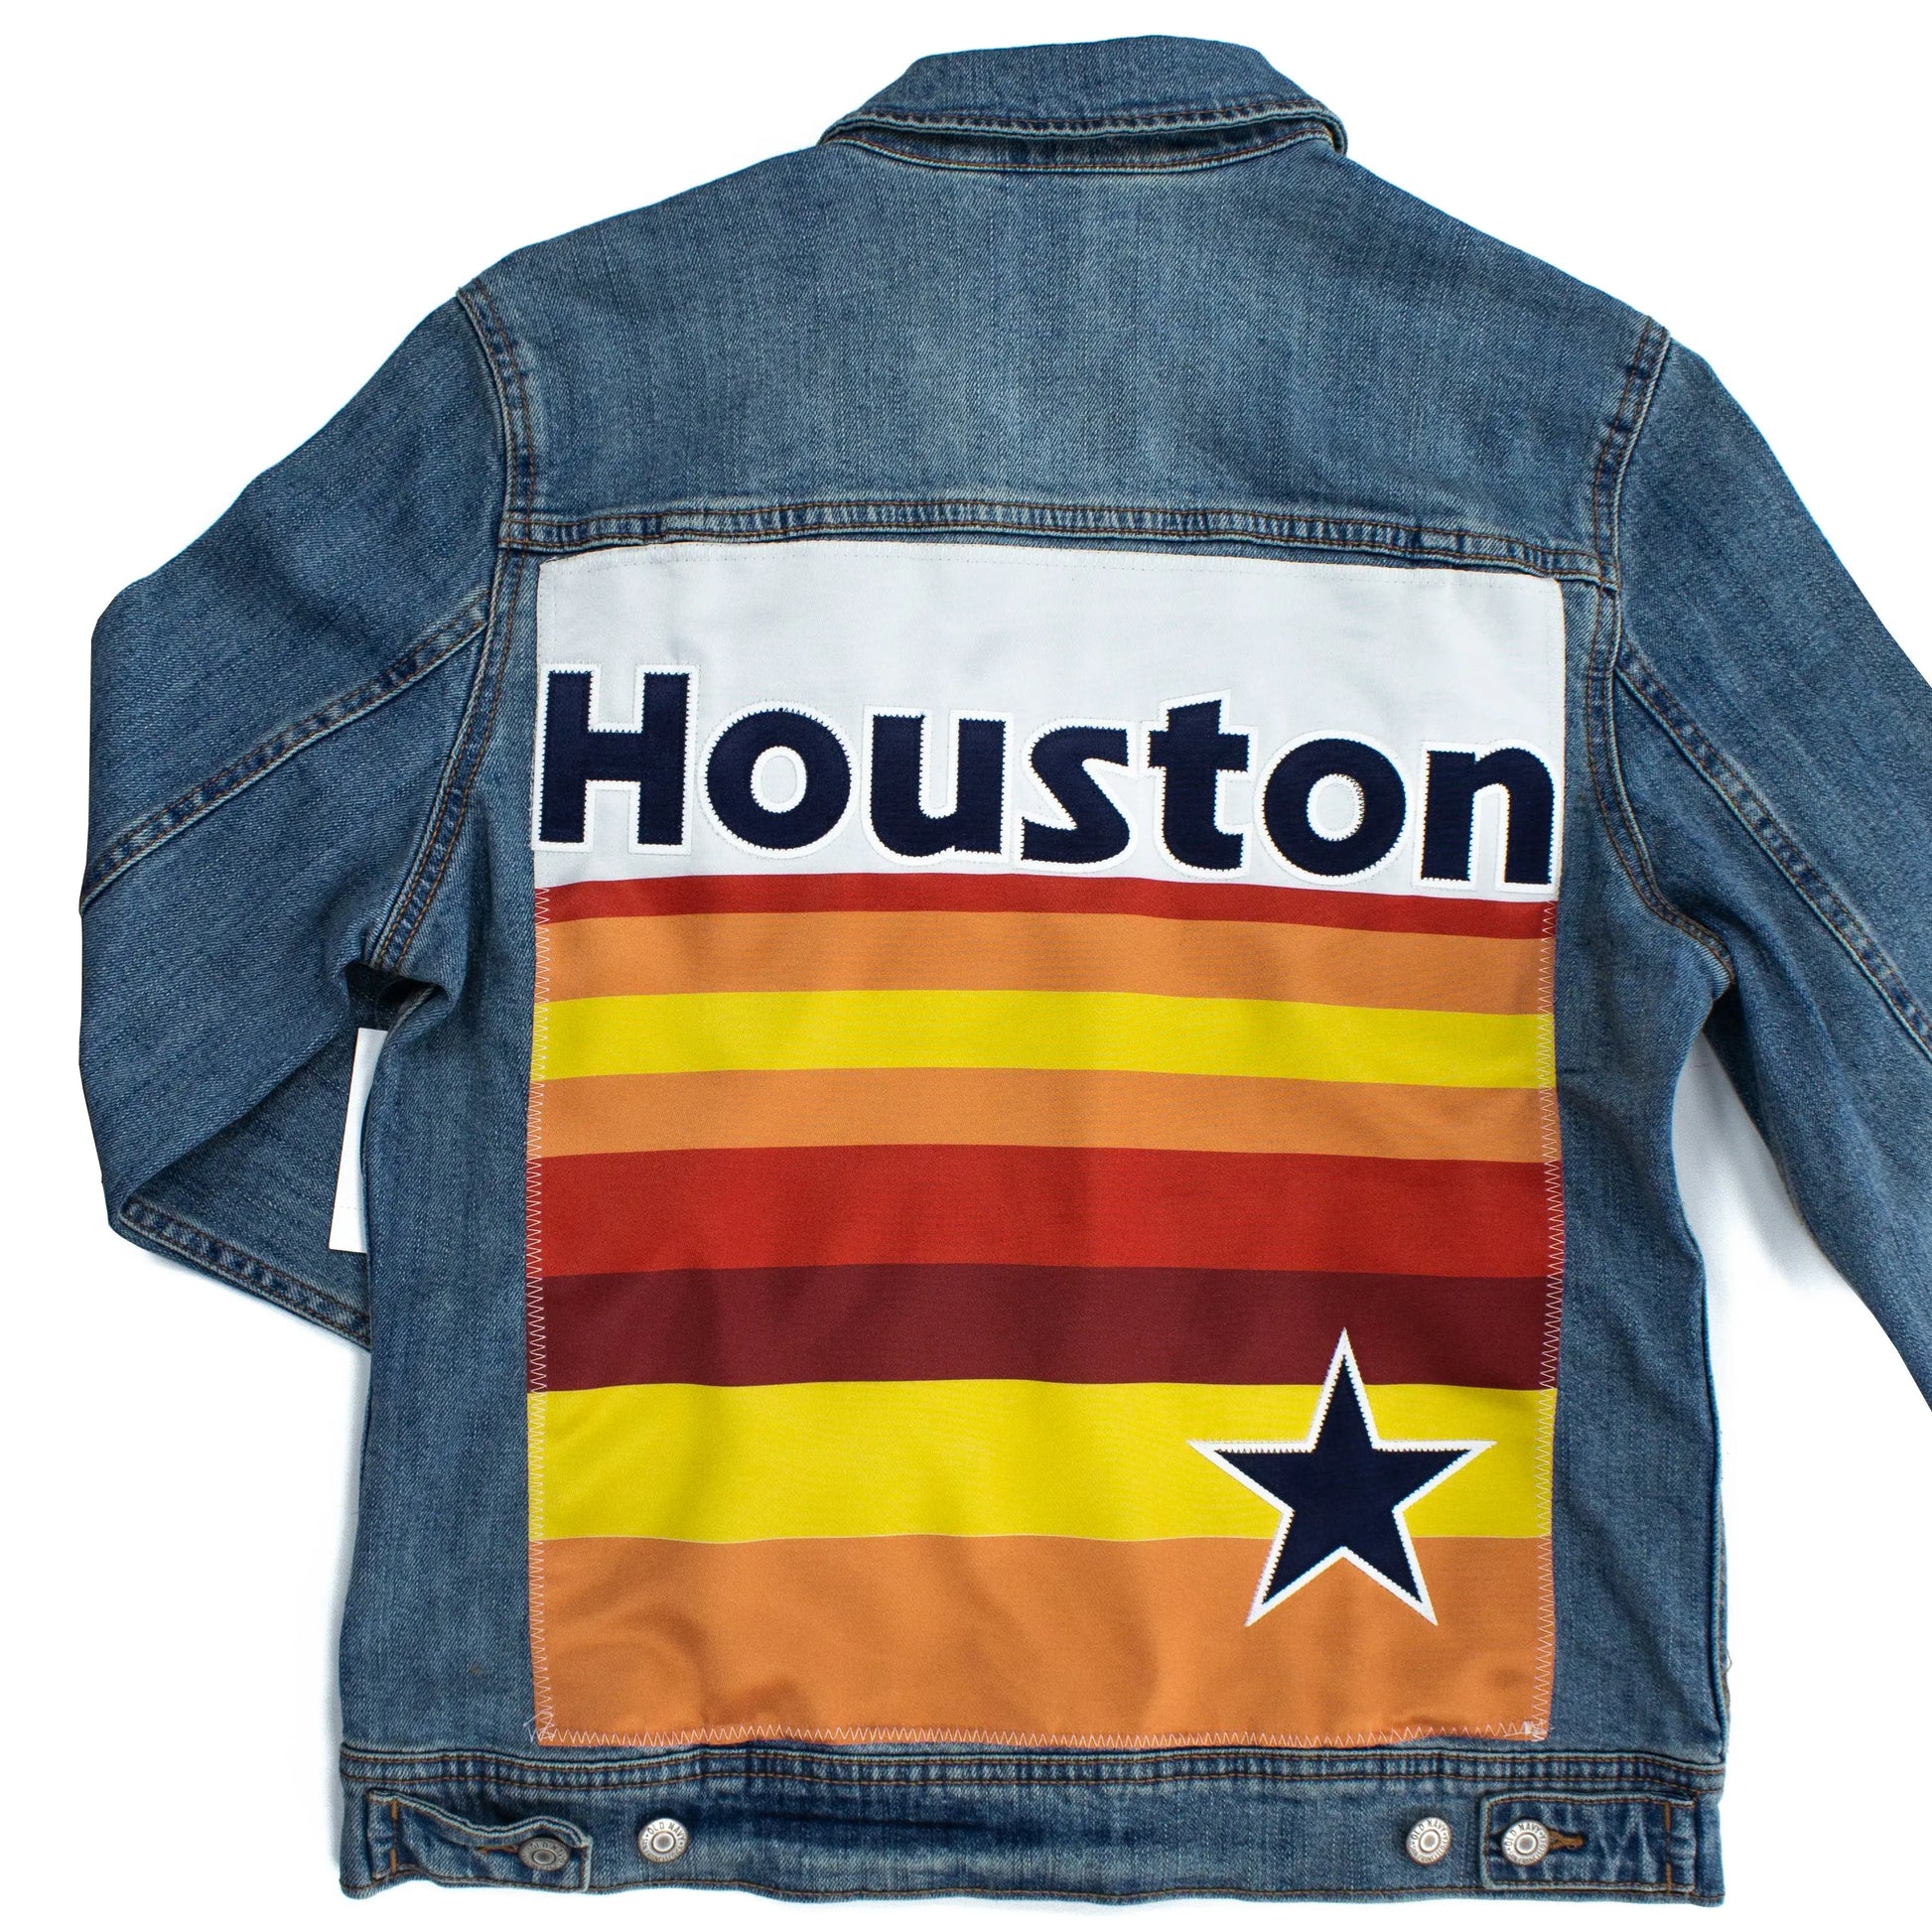 How to get your own custom Astros jean jacket - ABC13 Houston